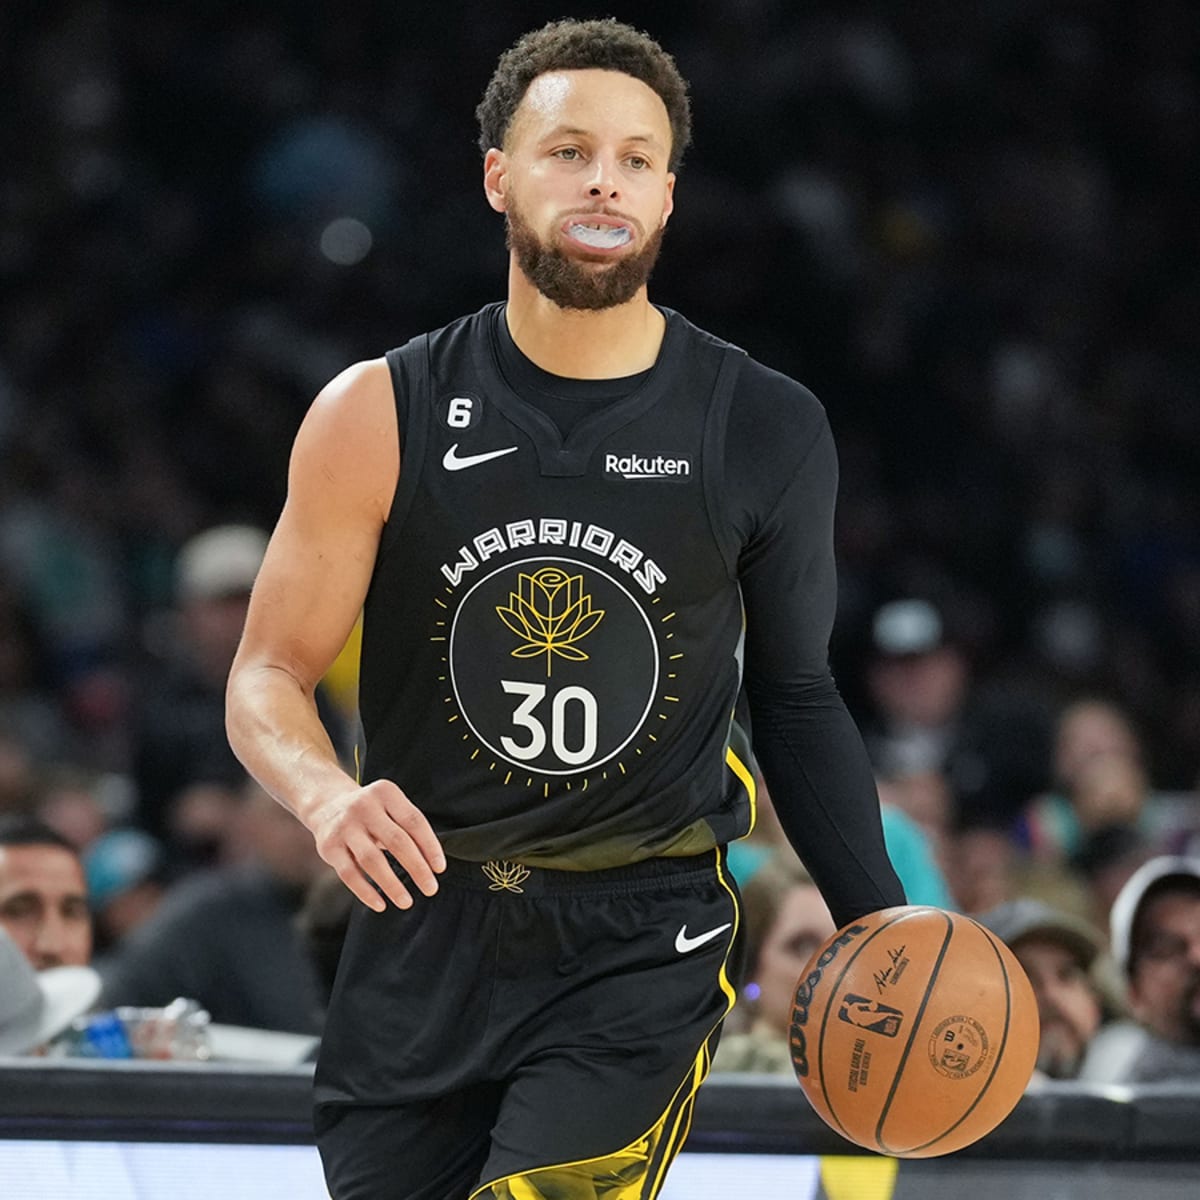 2023 NBA All-Star picks for the Western Conference - Sports Illustrated